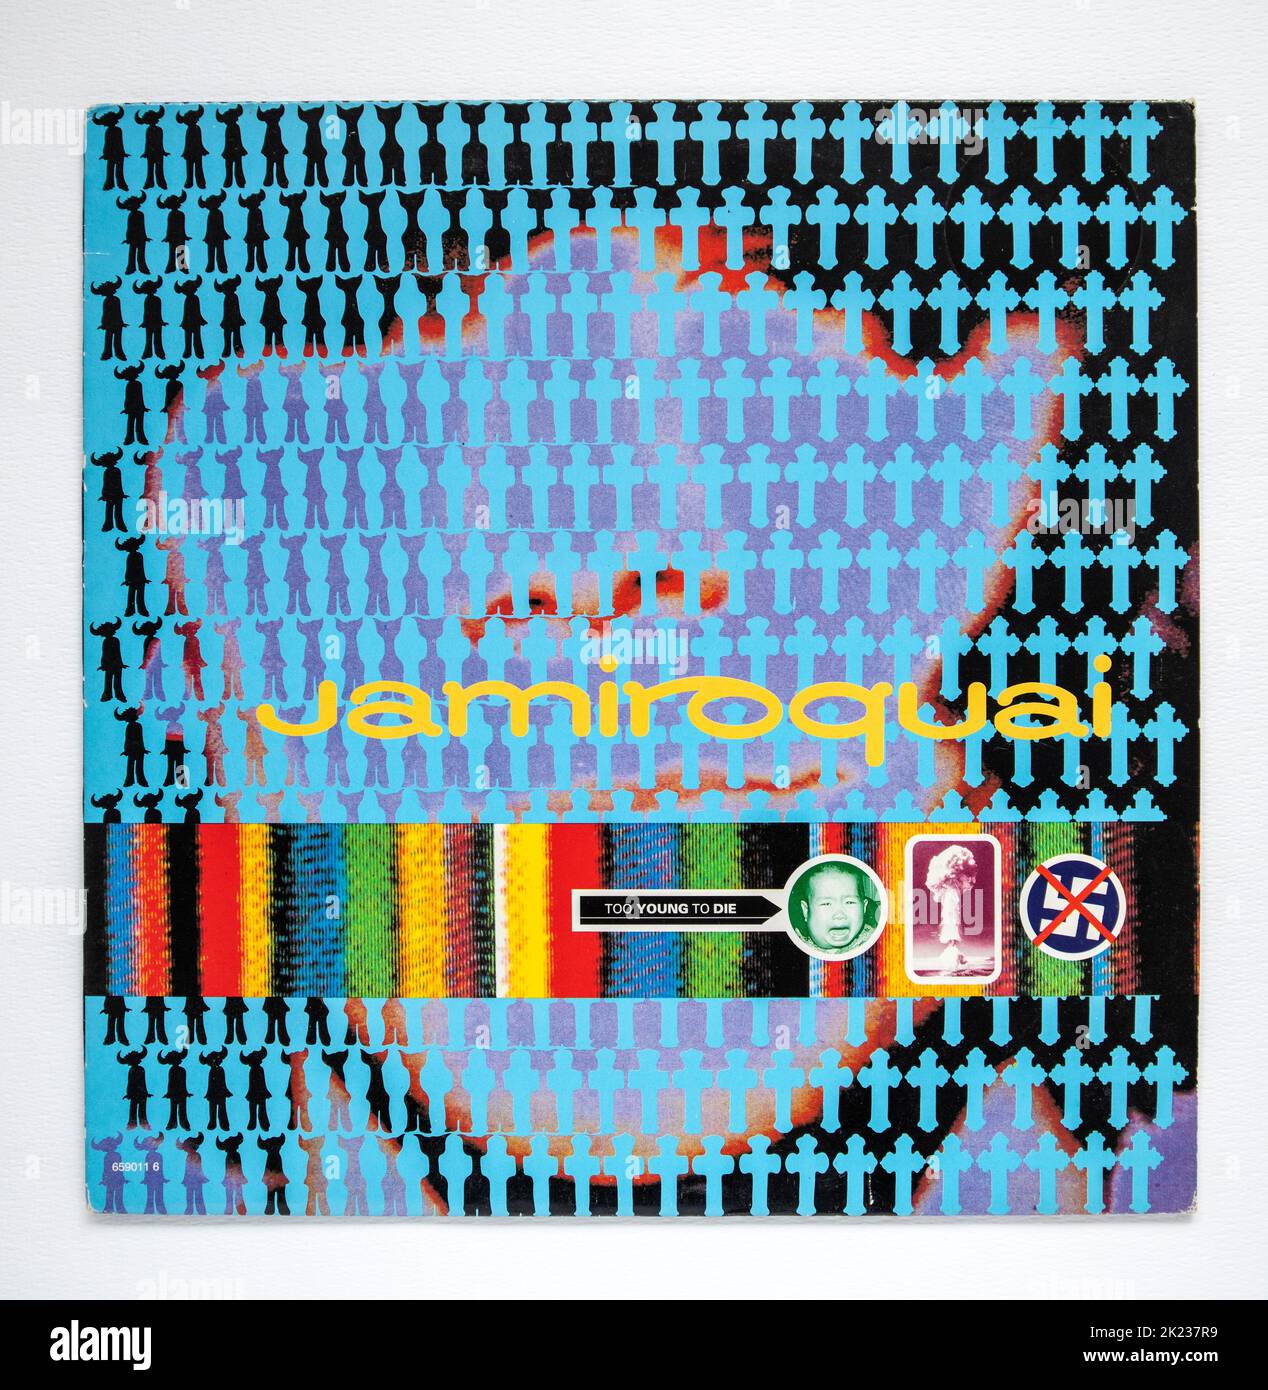 Picture cover of the 12 inch single version of Too Young To Die by Jamiroquai, which was released in 1993. Stock Photo